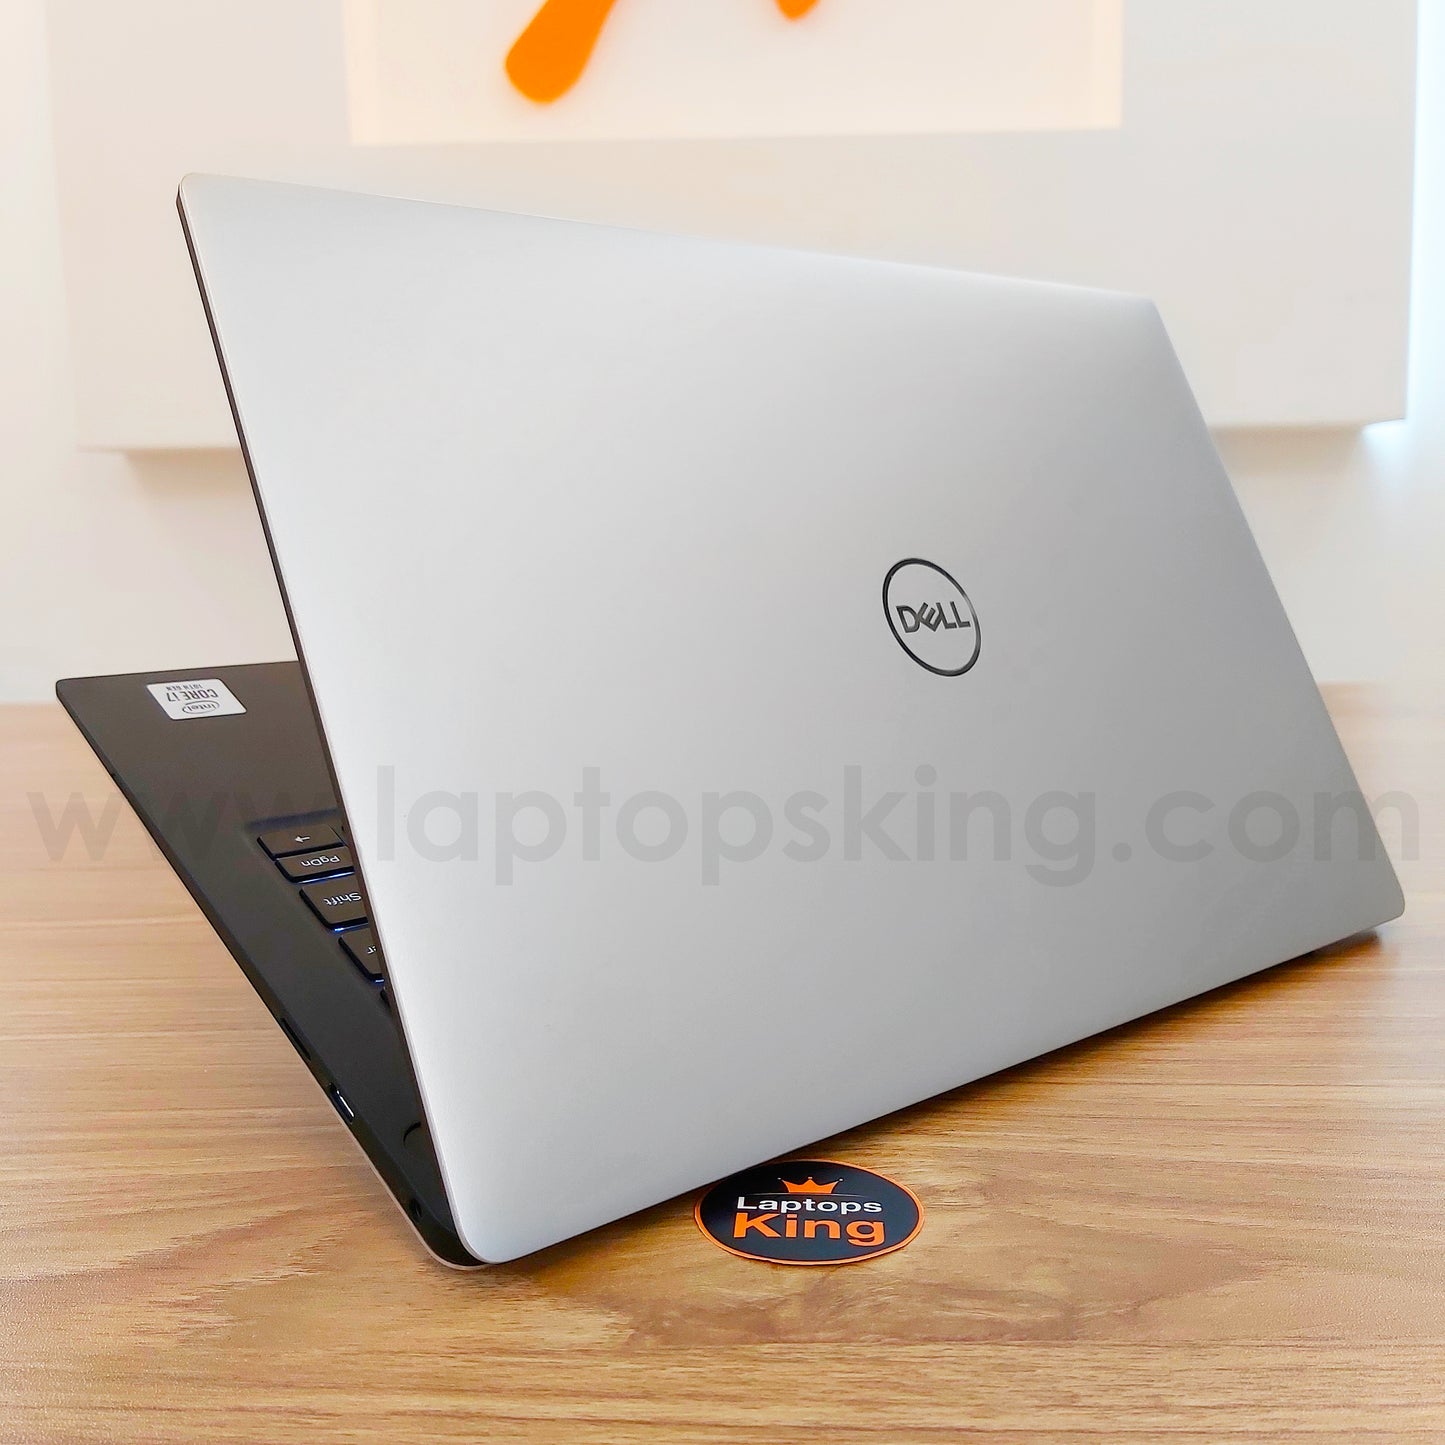 Dell XPS 13 7390 i7-10710U 13.3" Laptop Offer (New Open Box)